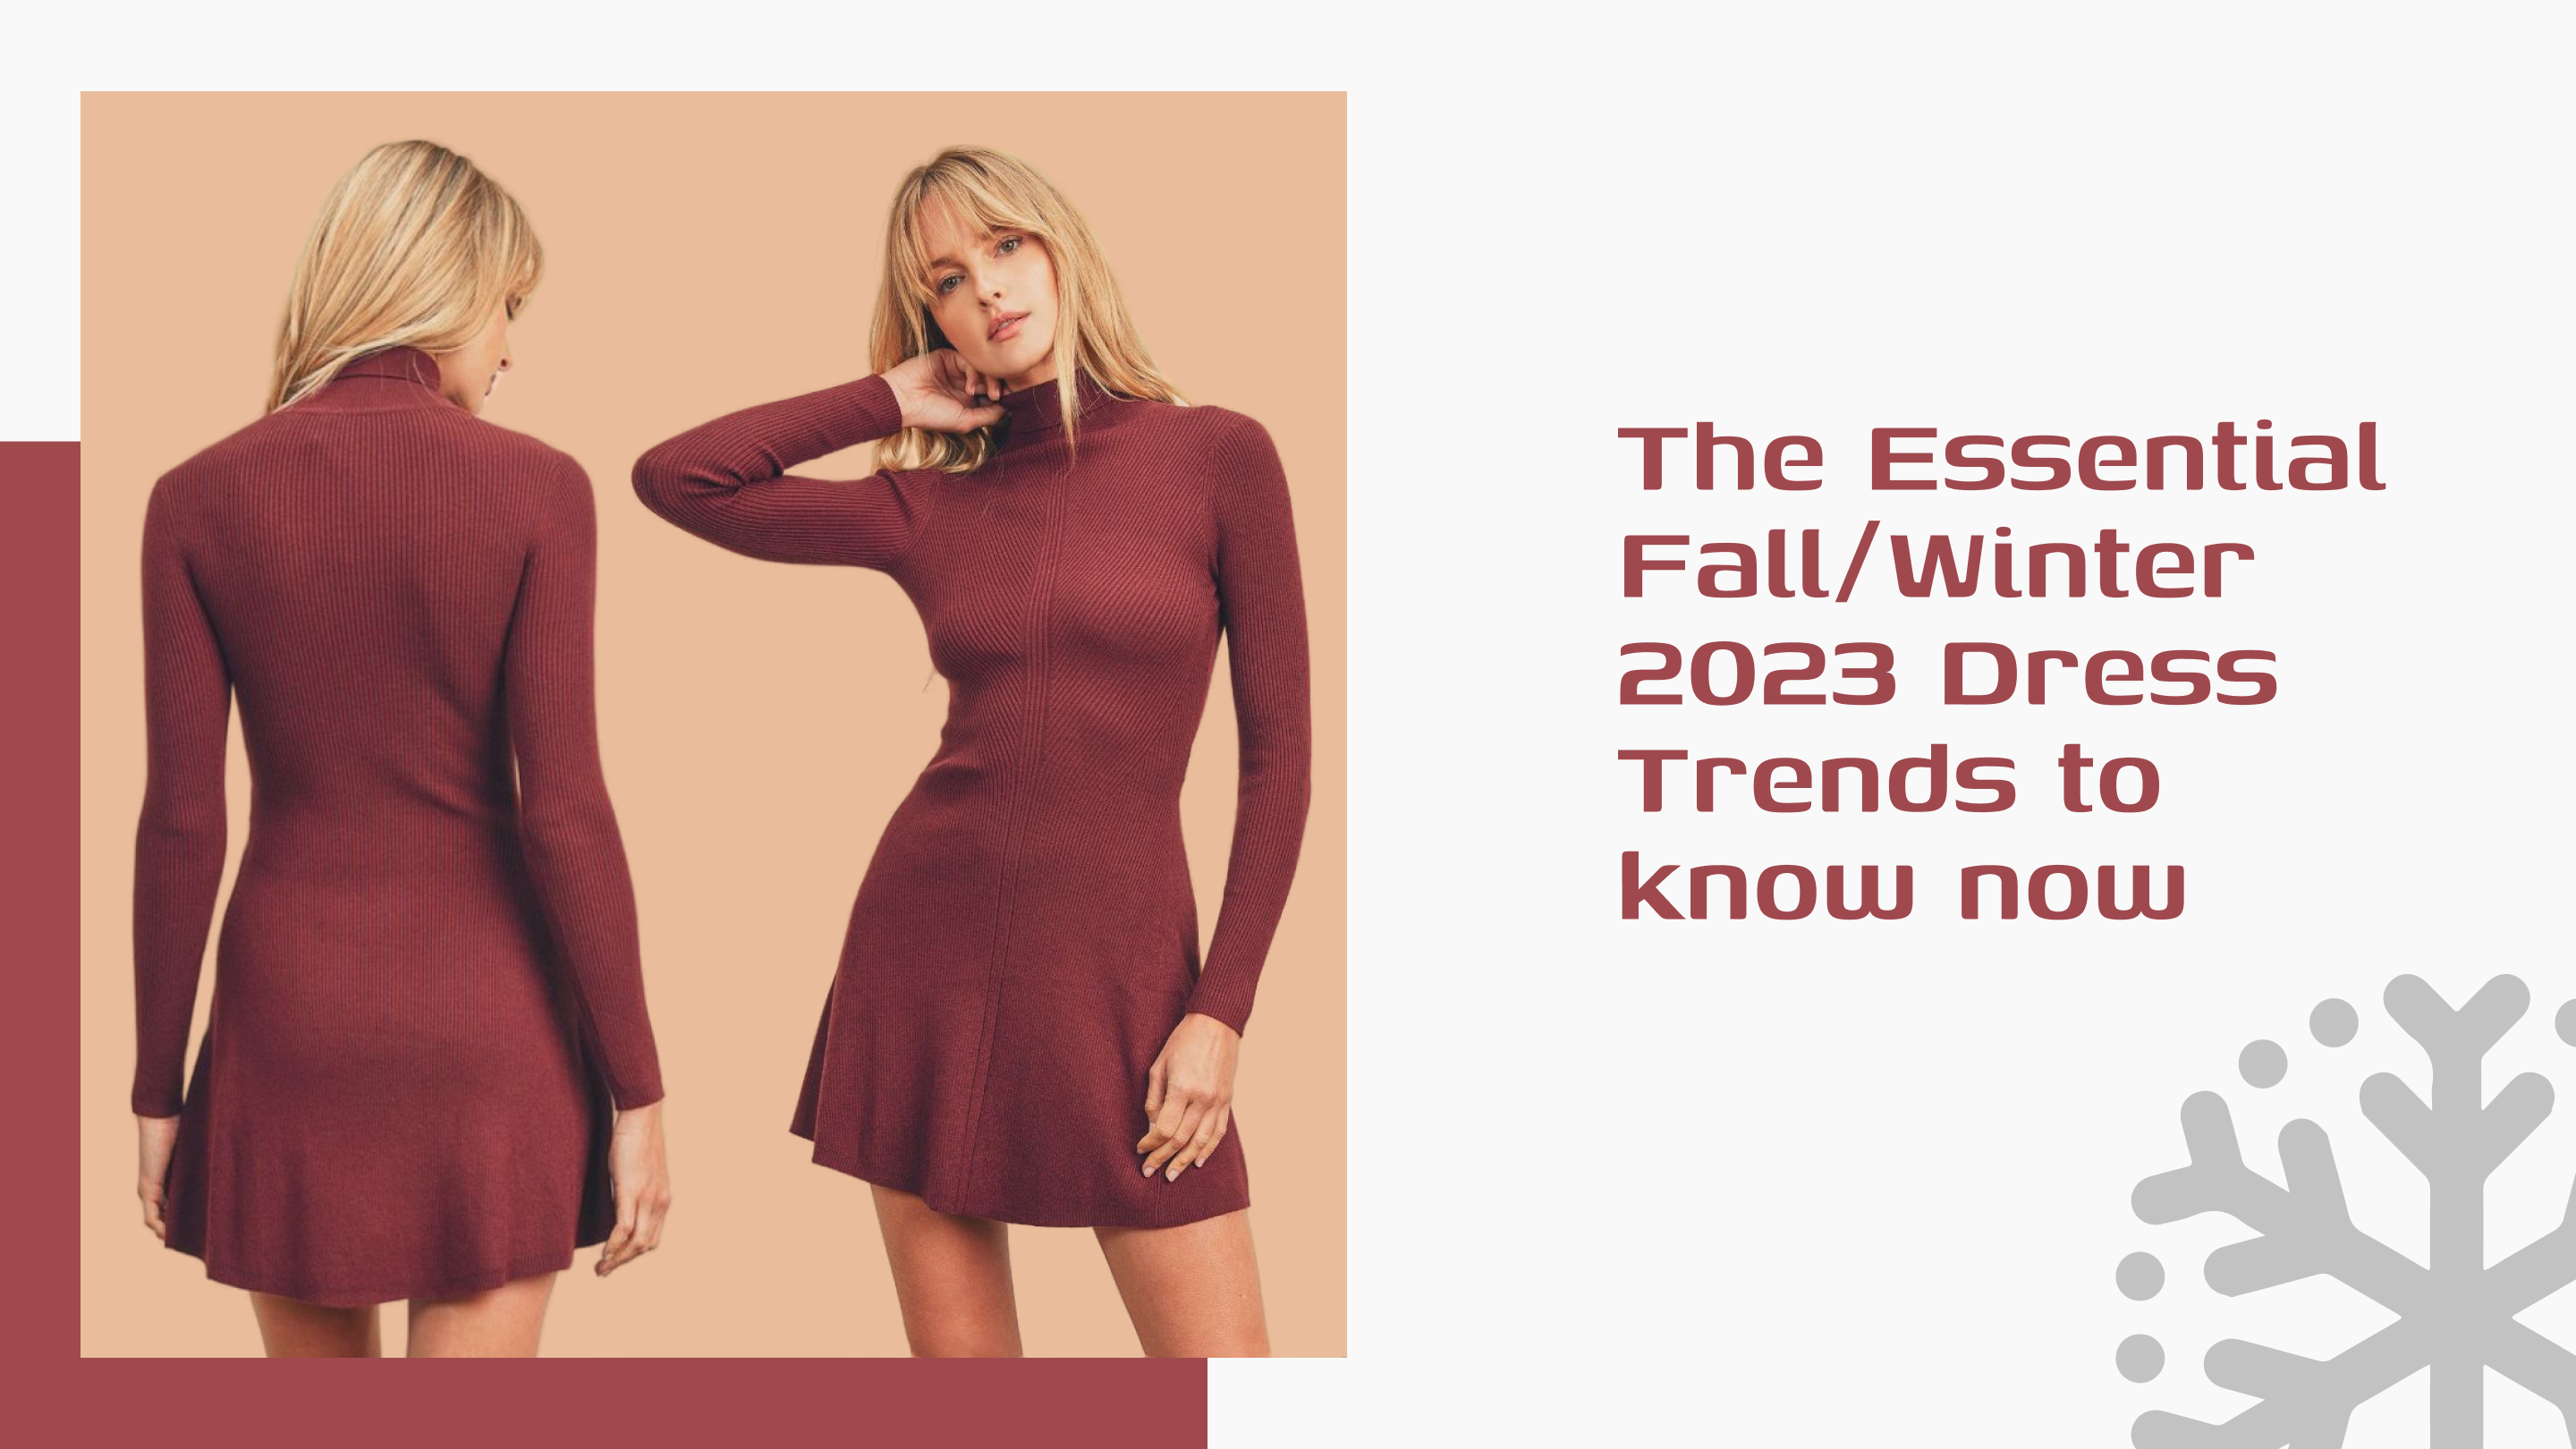 The Essential Fall/Winter 2023 Dress Trends to know now